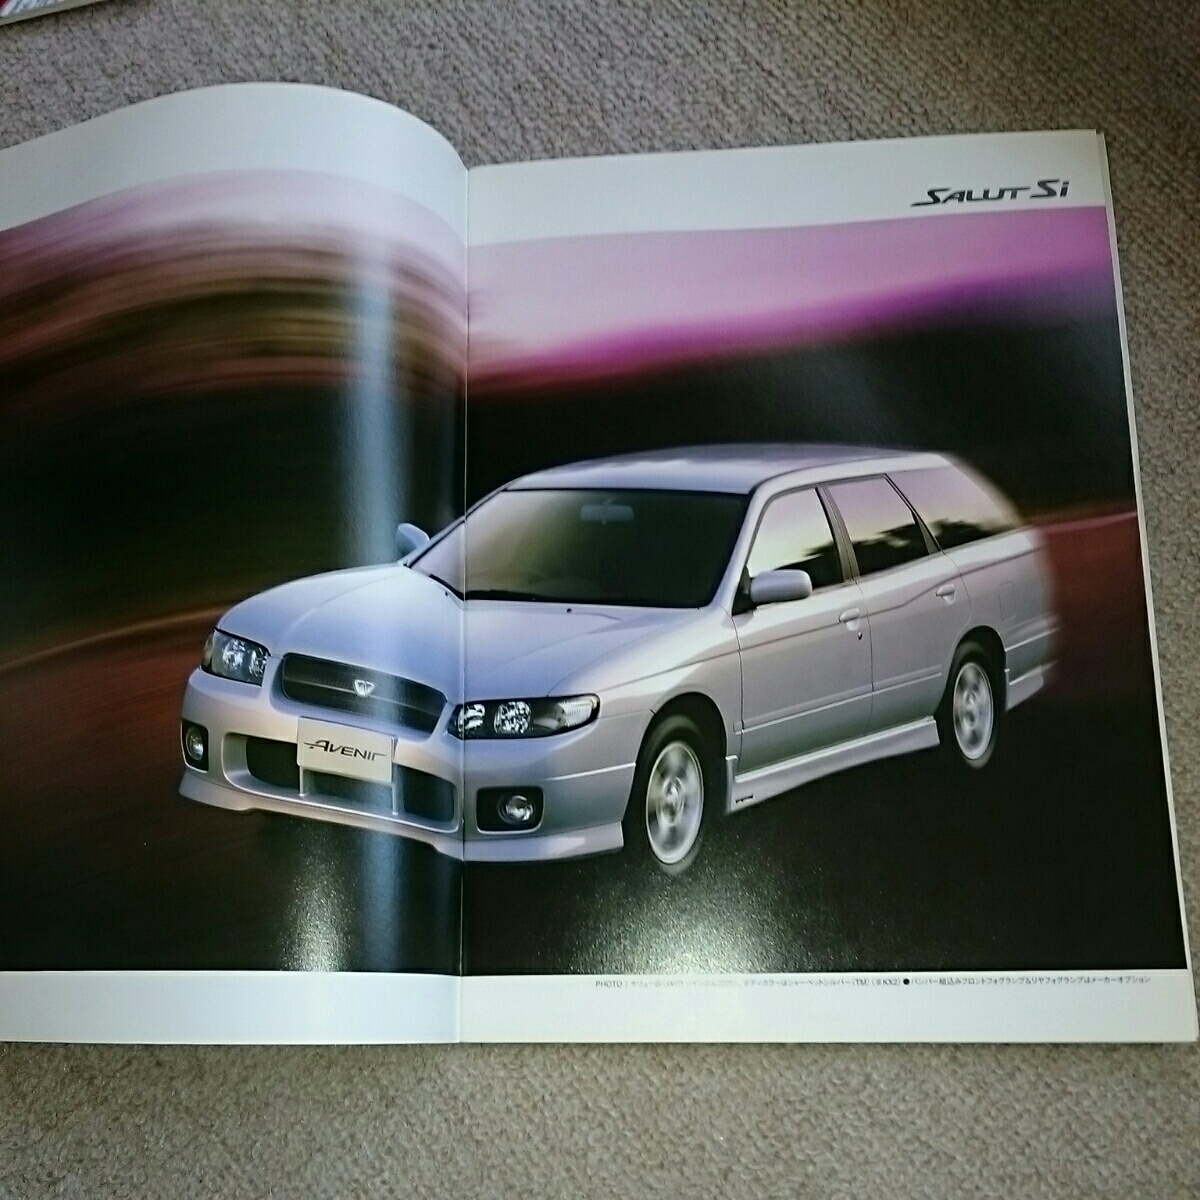  records out of production,2000 year 5 month issue, model GF-PNW11,PW11,TA-W11. Nissan Avenir Station Wagon.GT4-V,GT4-Si other.SR20DET,SR20DE engine.